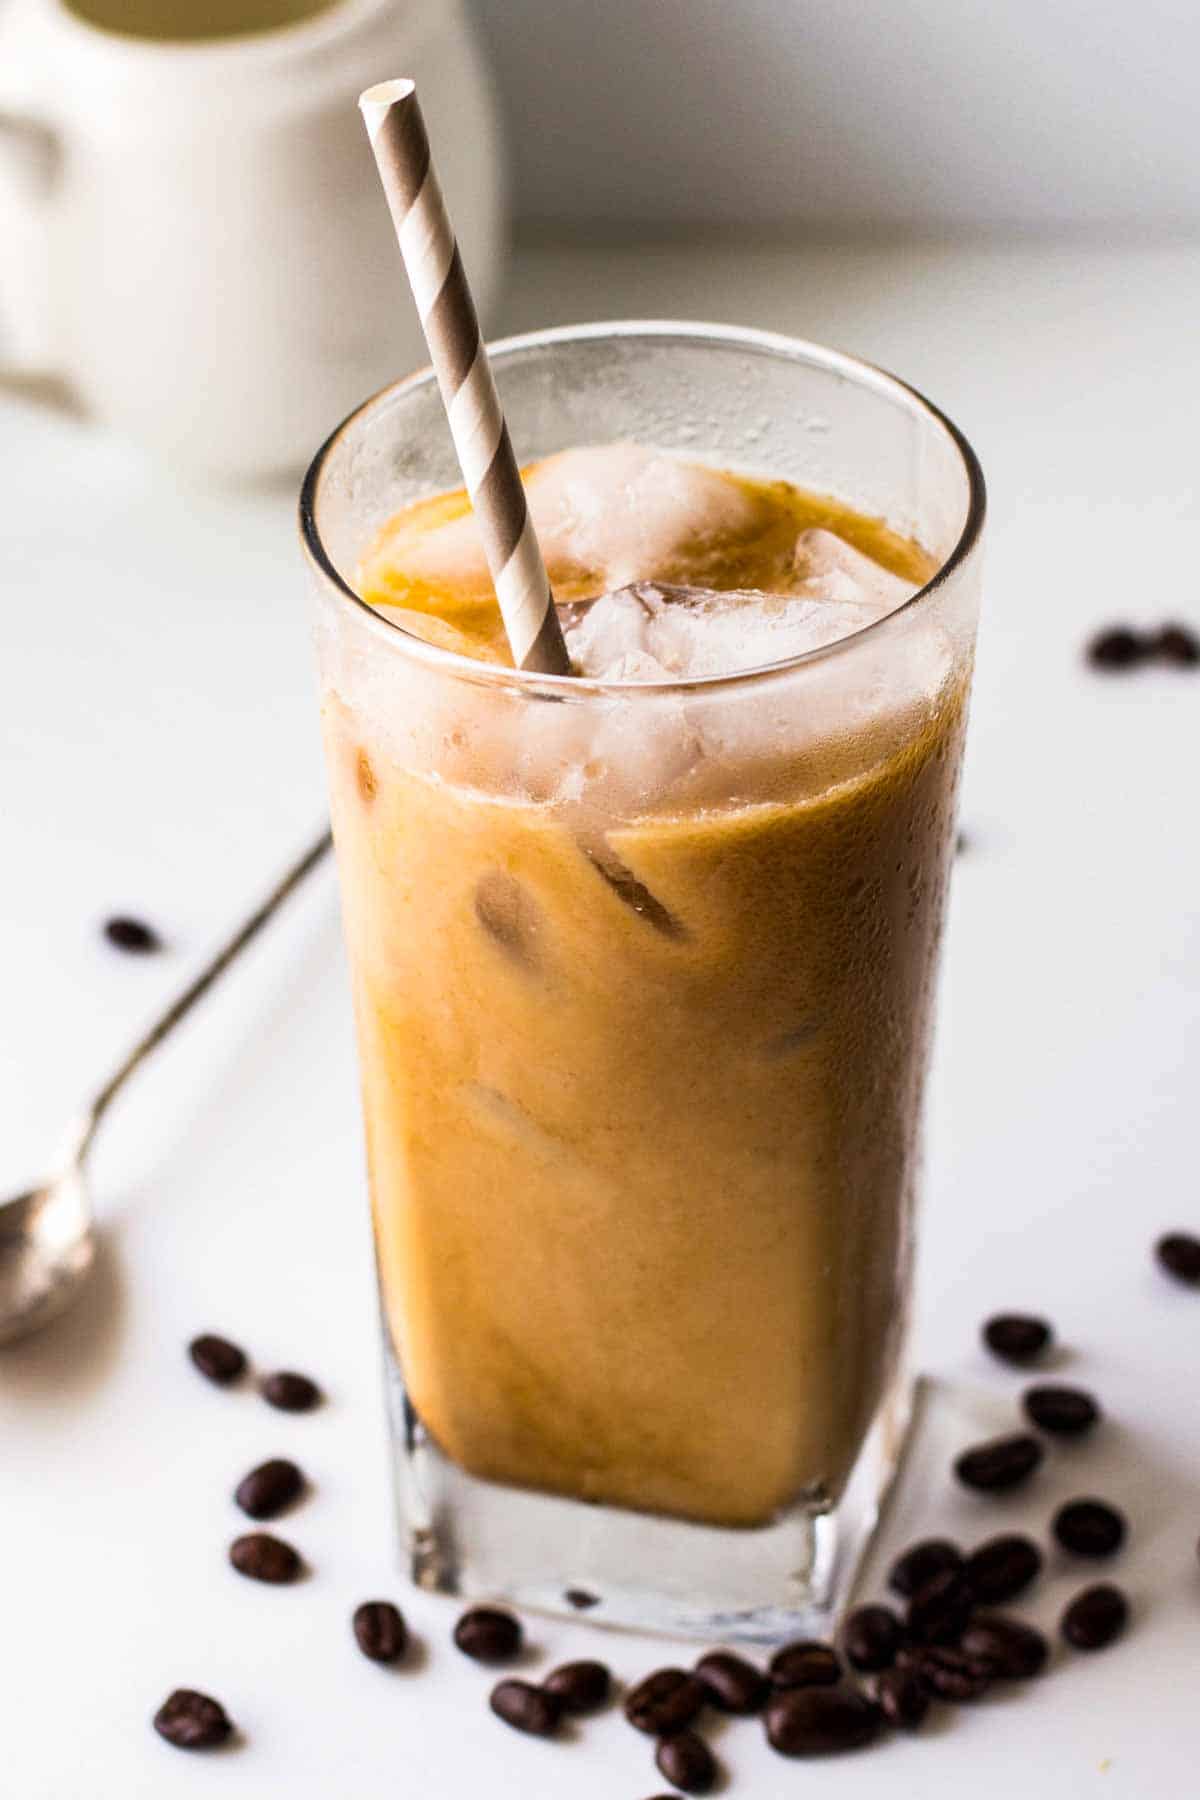 https://coleycooks.com/wp-content/uploads/2022/07/easy-homemade-cold-brew-coffee-2.jpg